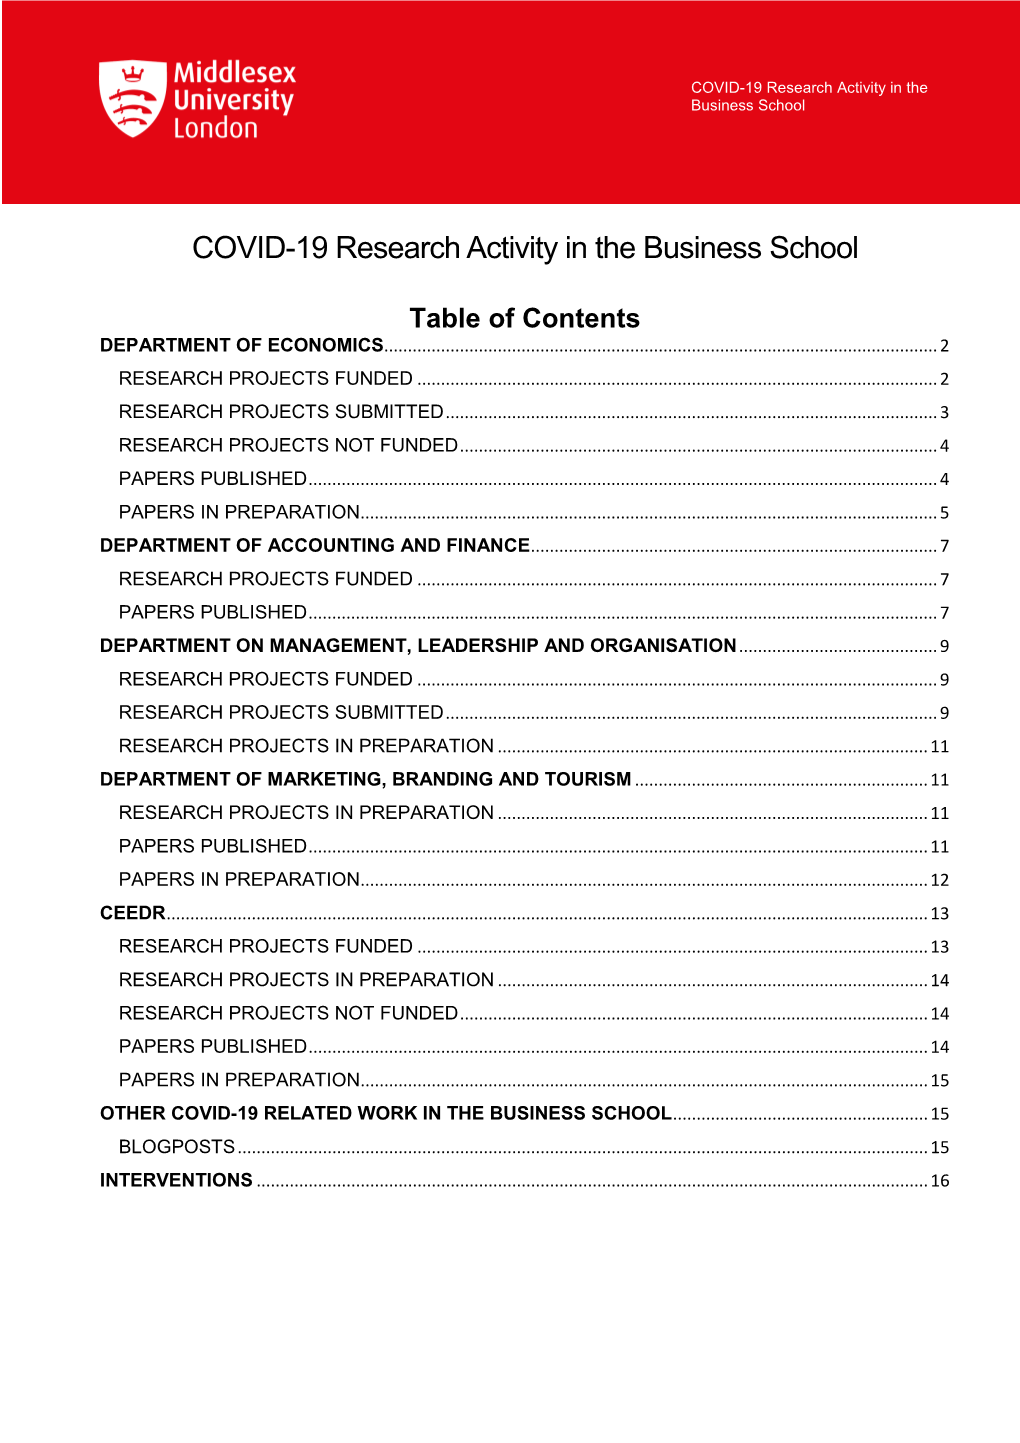 COVID-19 Research Activity in the Business School